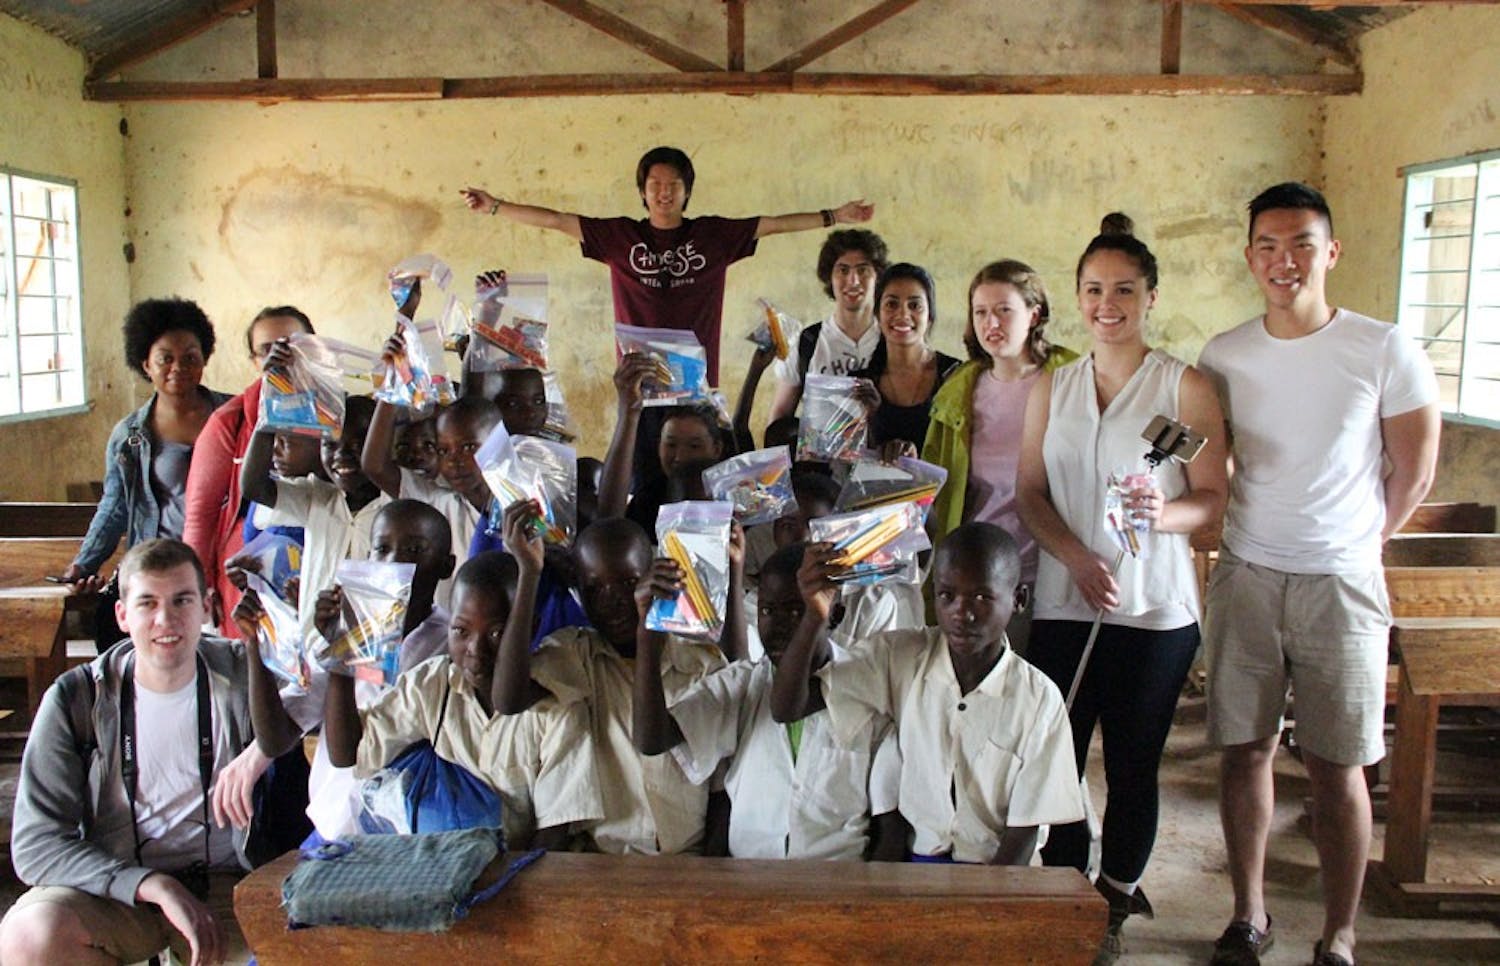 Tyler Choi raised over 2,000 school supplies and $1,000 in donations. He made 230 bags with school supplies and gave them to the principal of the primary school on his second trip to Tanzania.